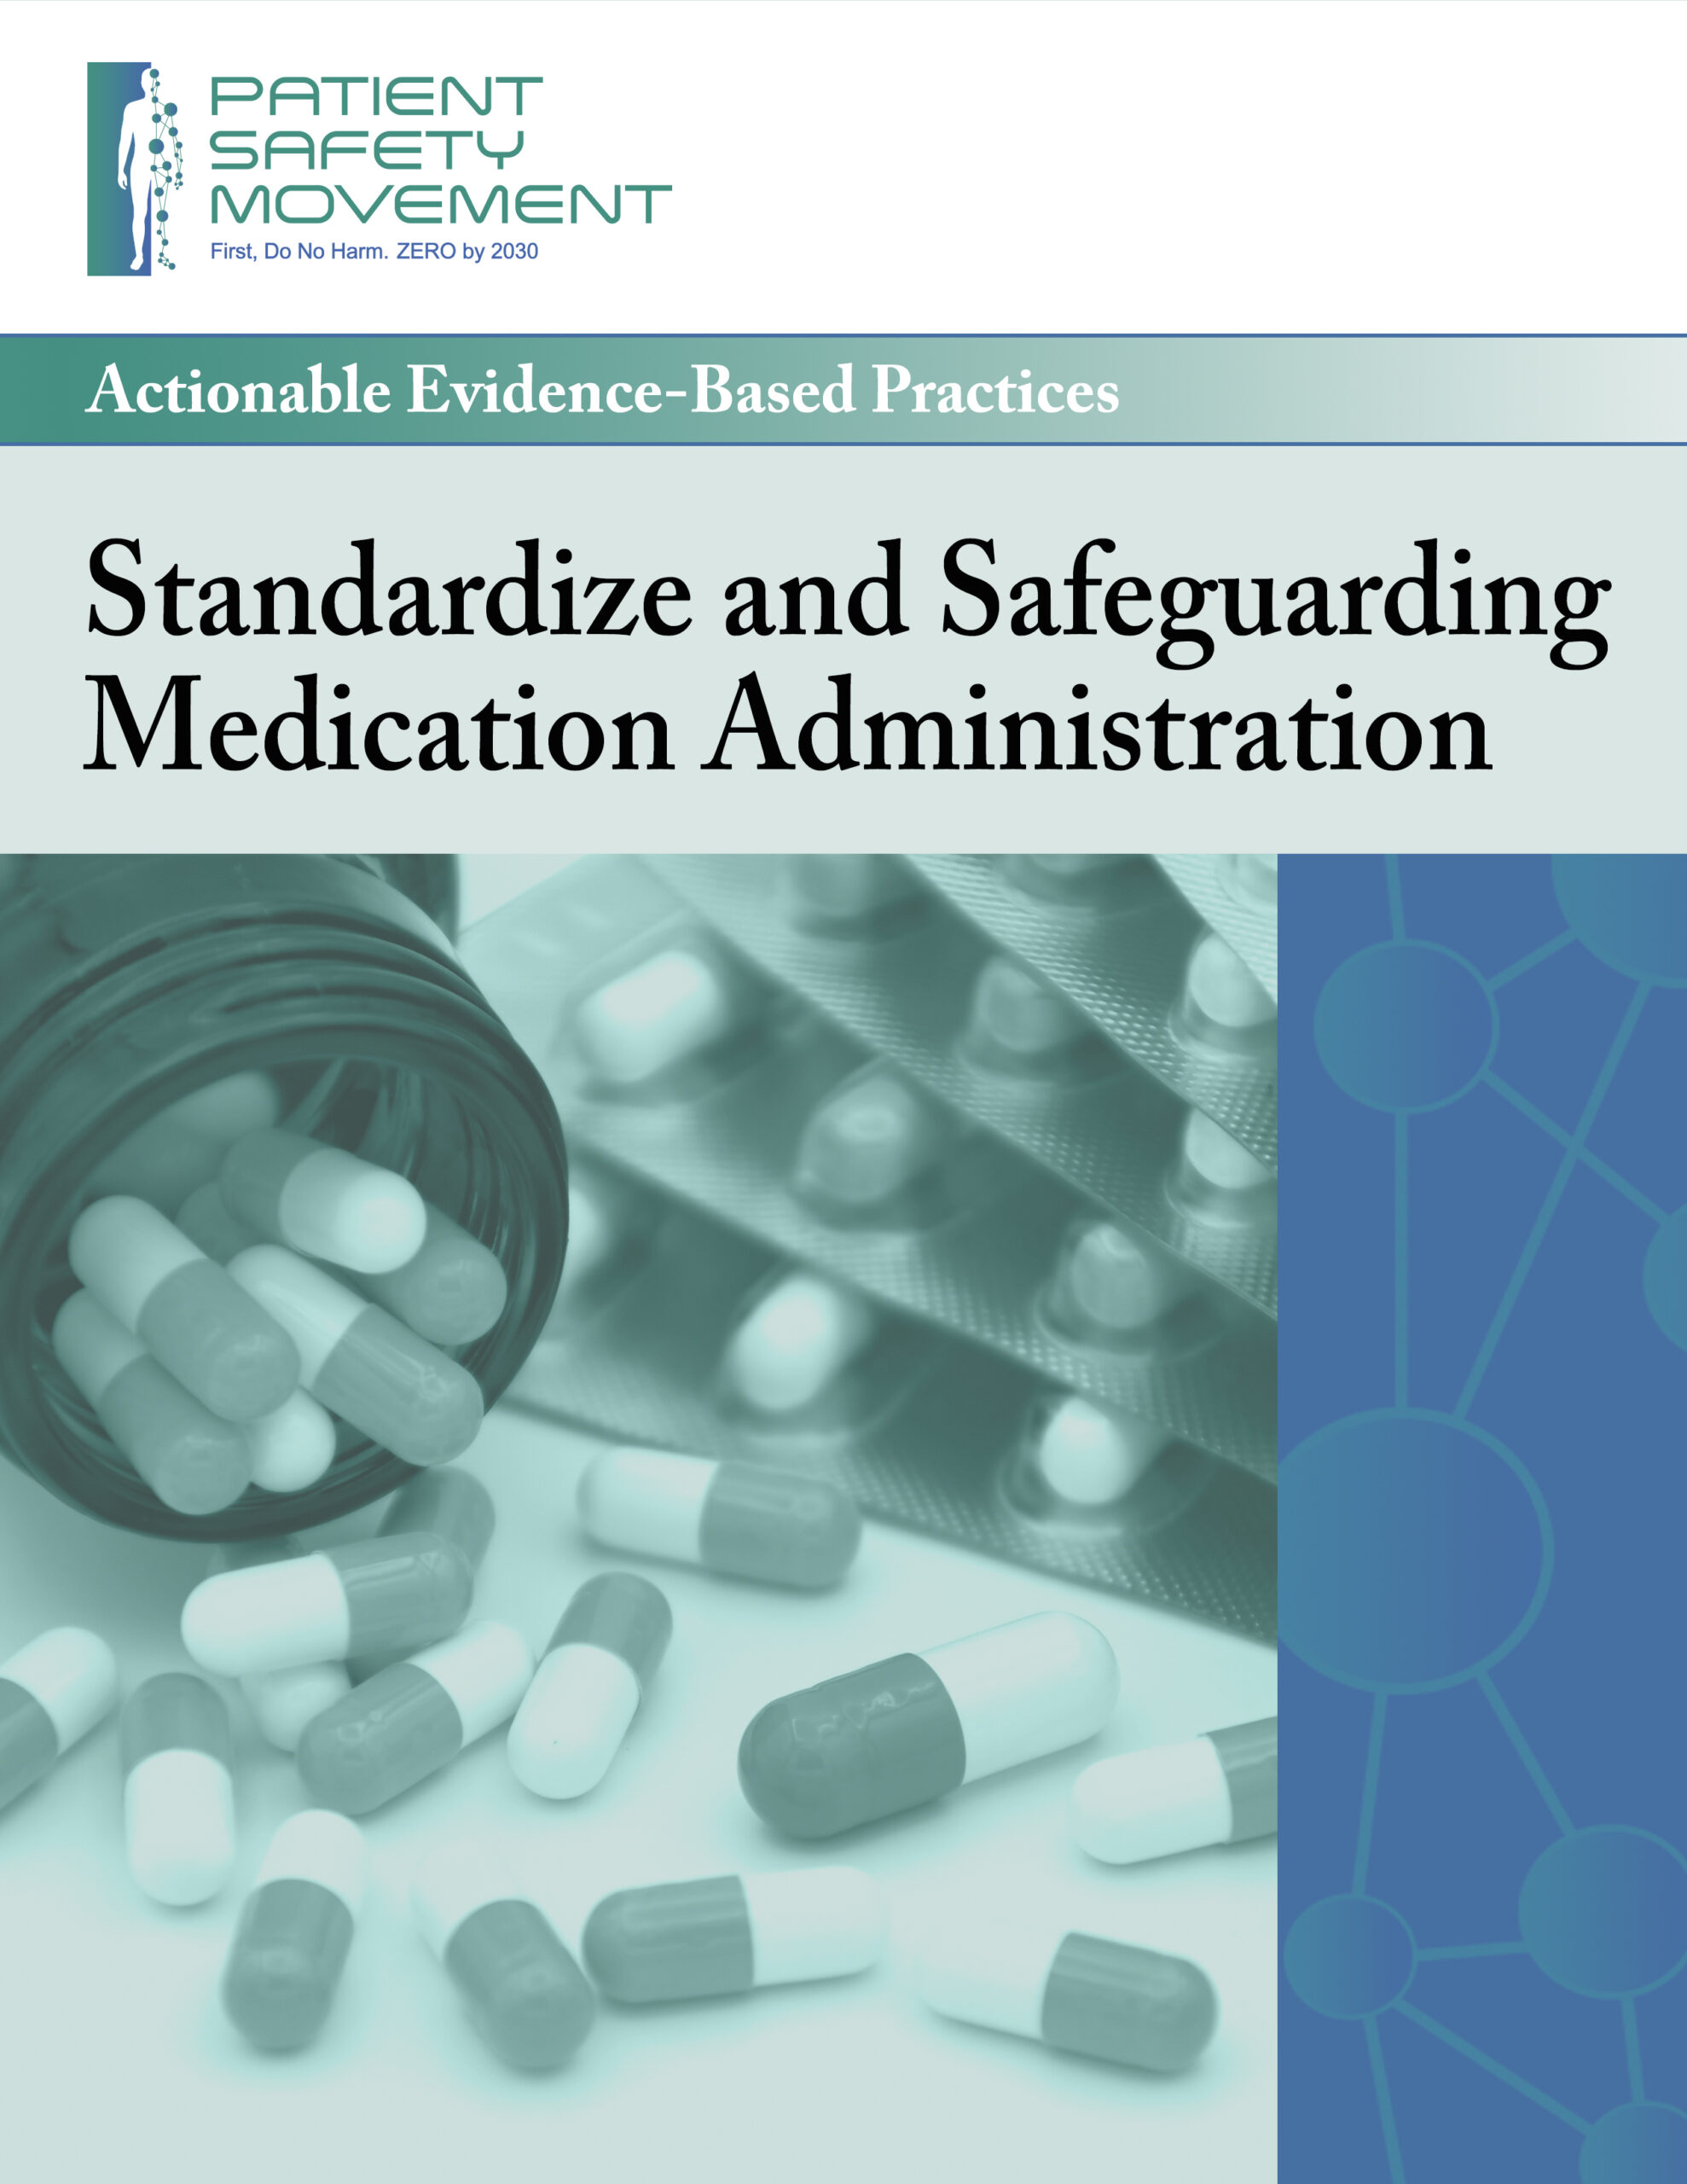 standardize and safeguard medication administration cover 2d scaled